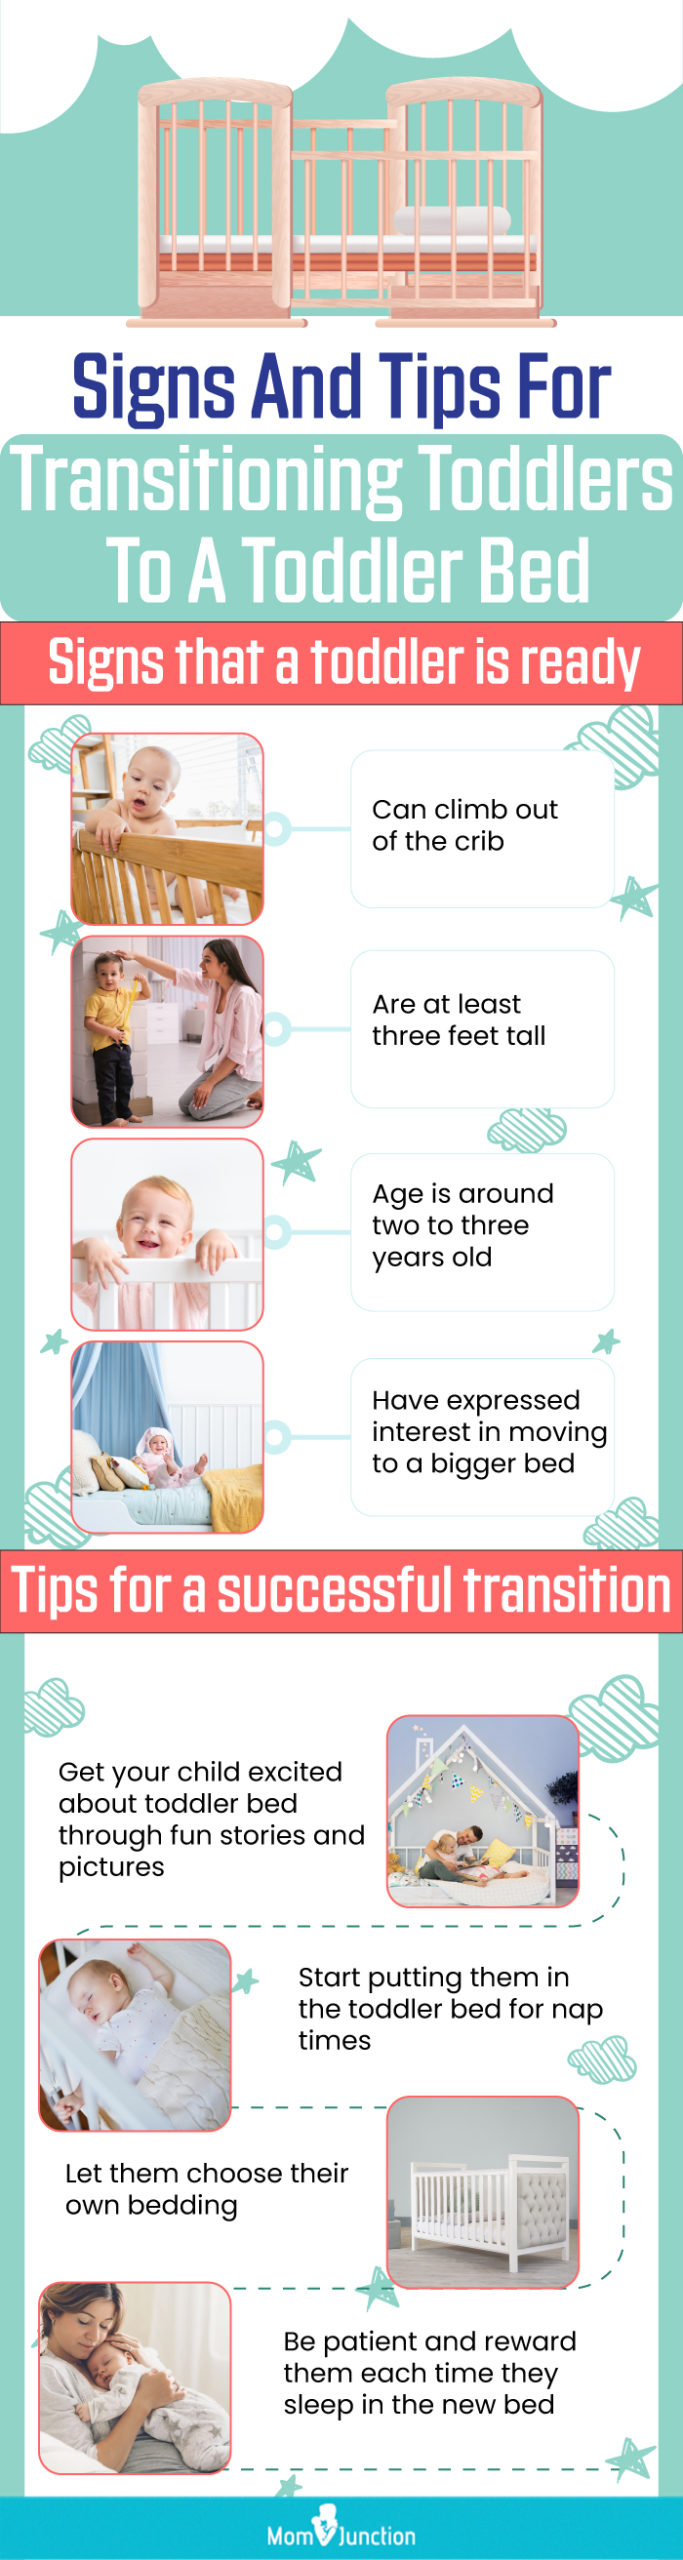 Signs And Tips For Transitioning Toddlers To A Toddler Bed (infographic)